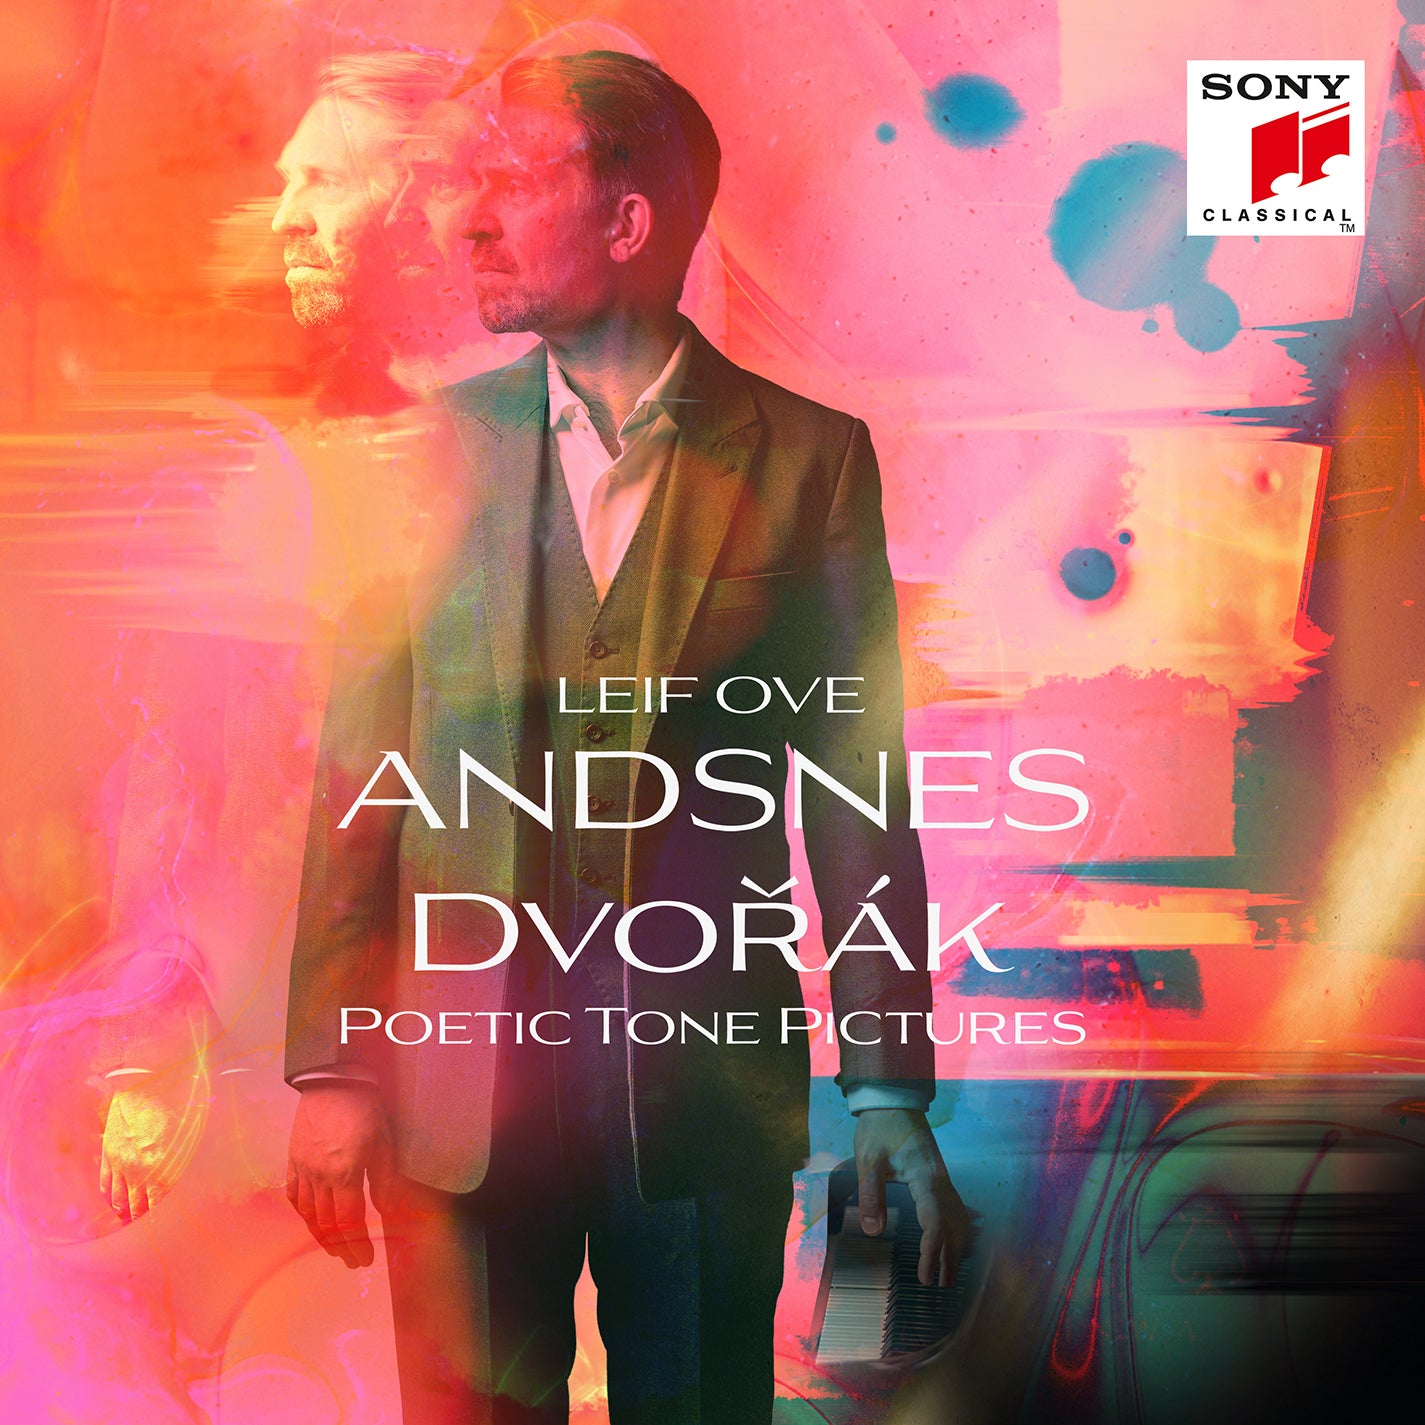 Dvořák: Poetic Tone Pictures, Op. 85 / Leif Ove Andsnes